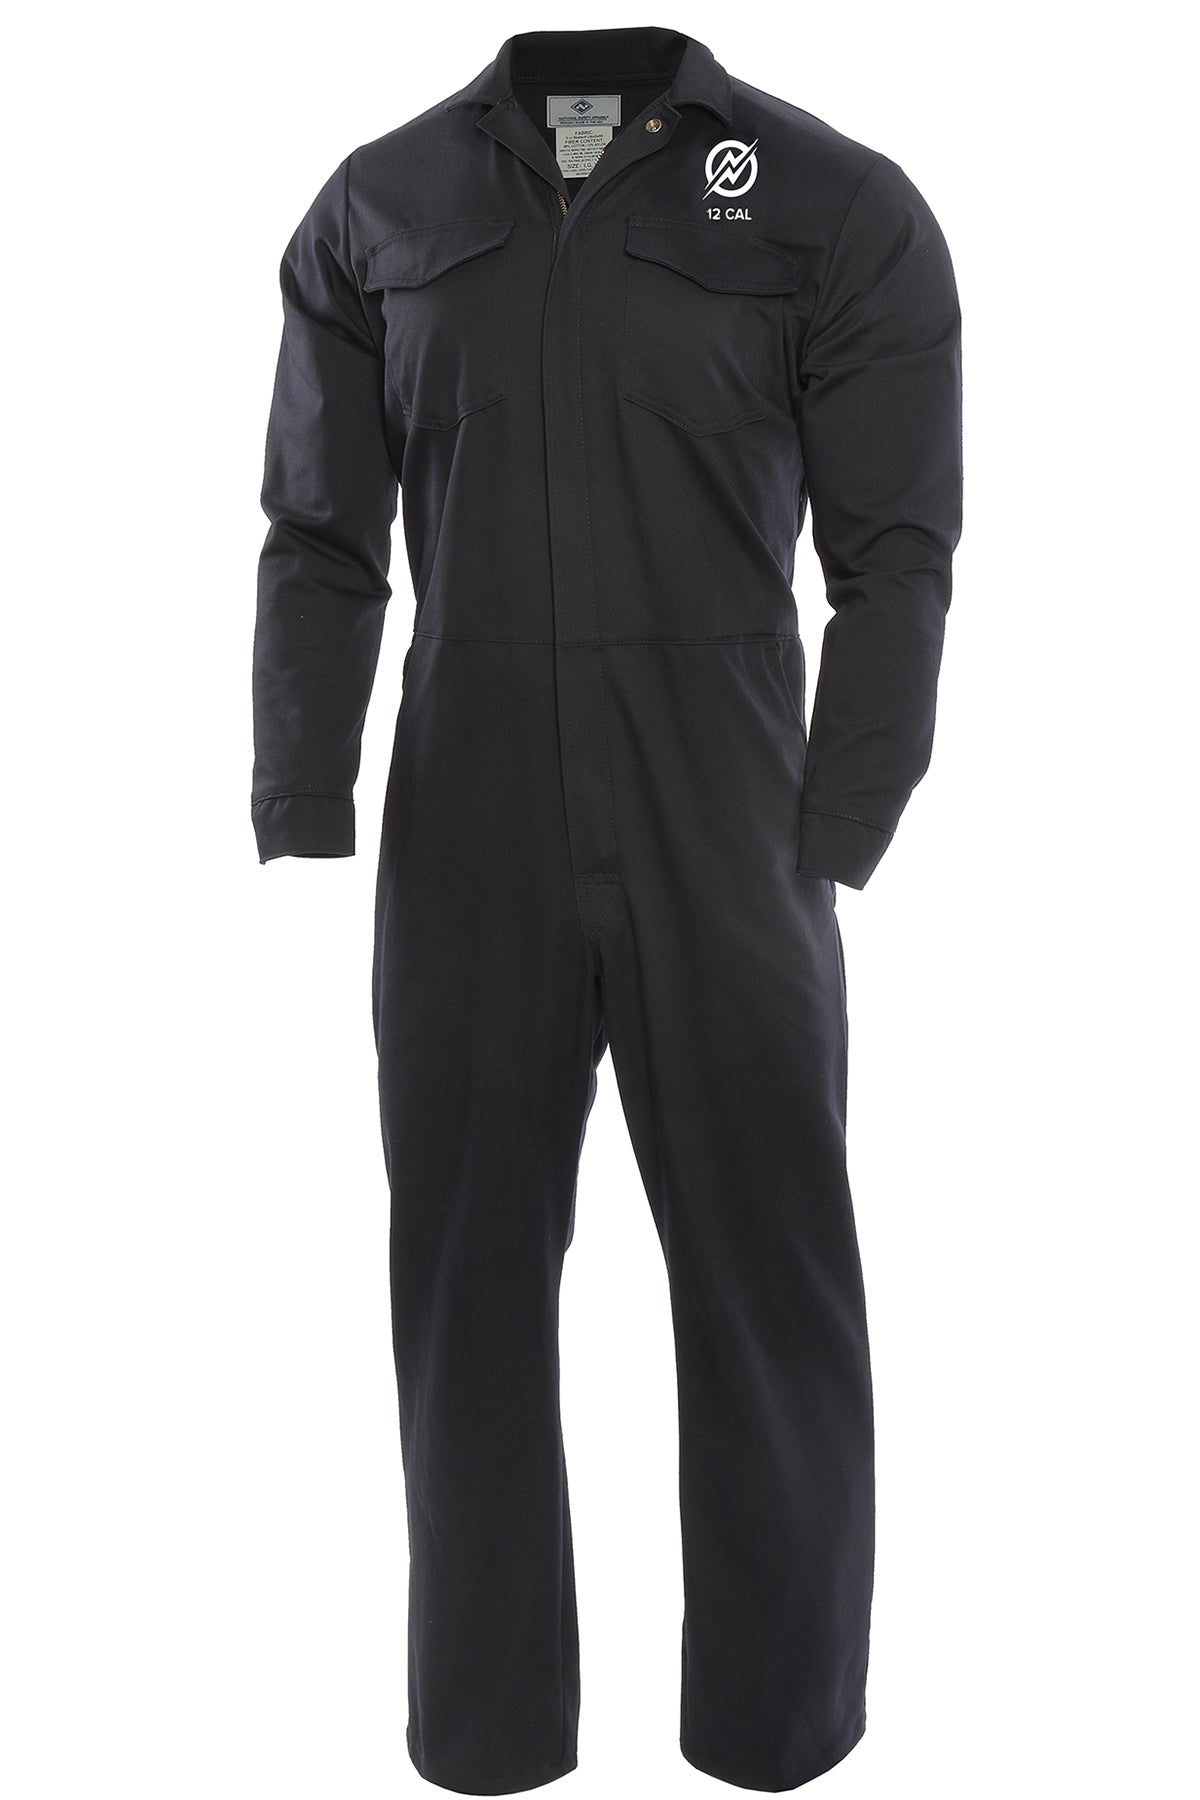 Enespro 12 Cal Coverall